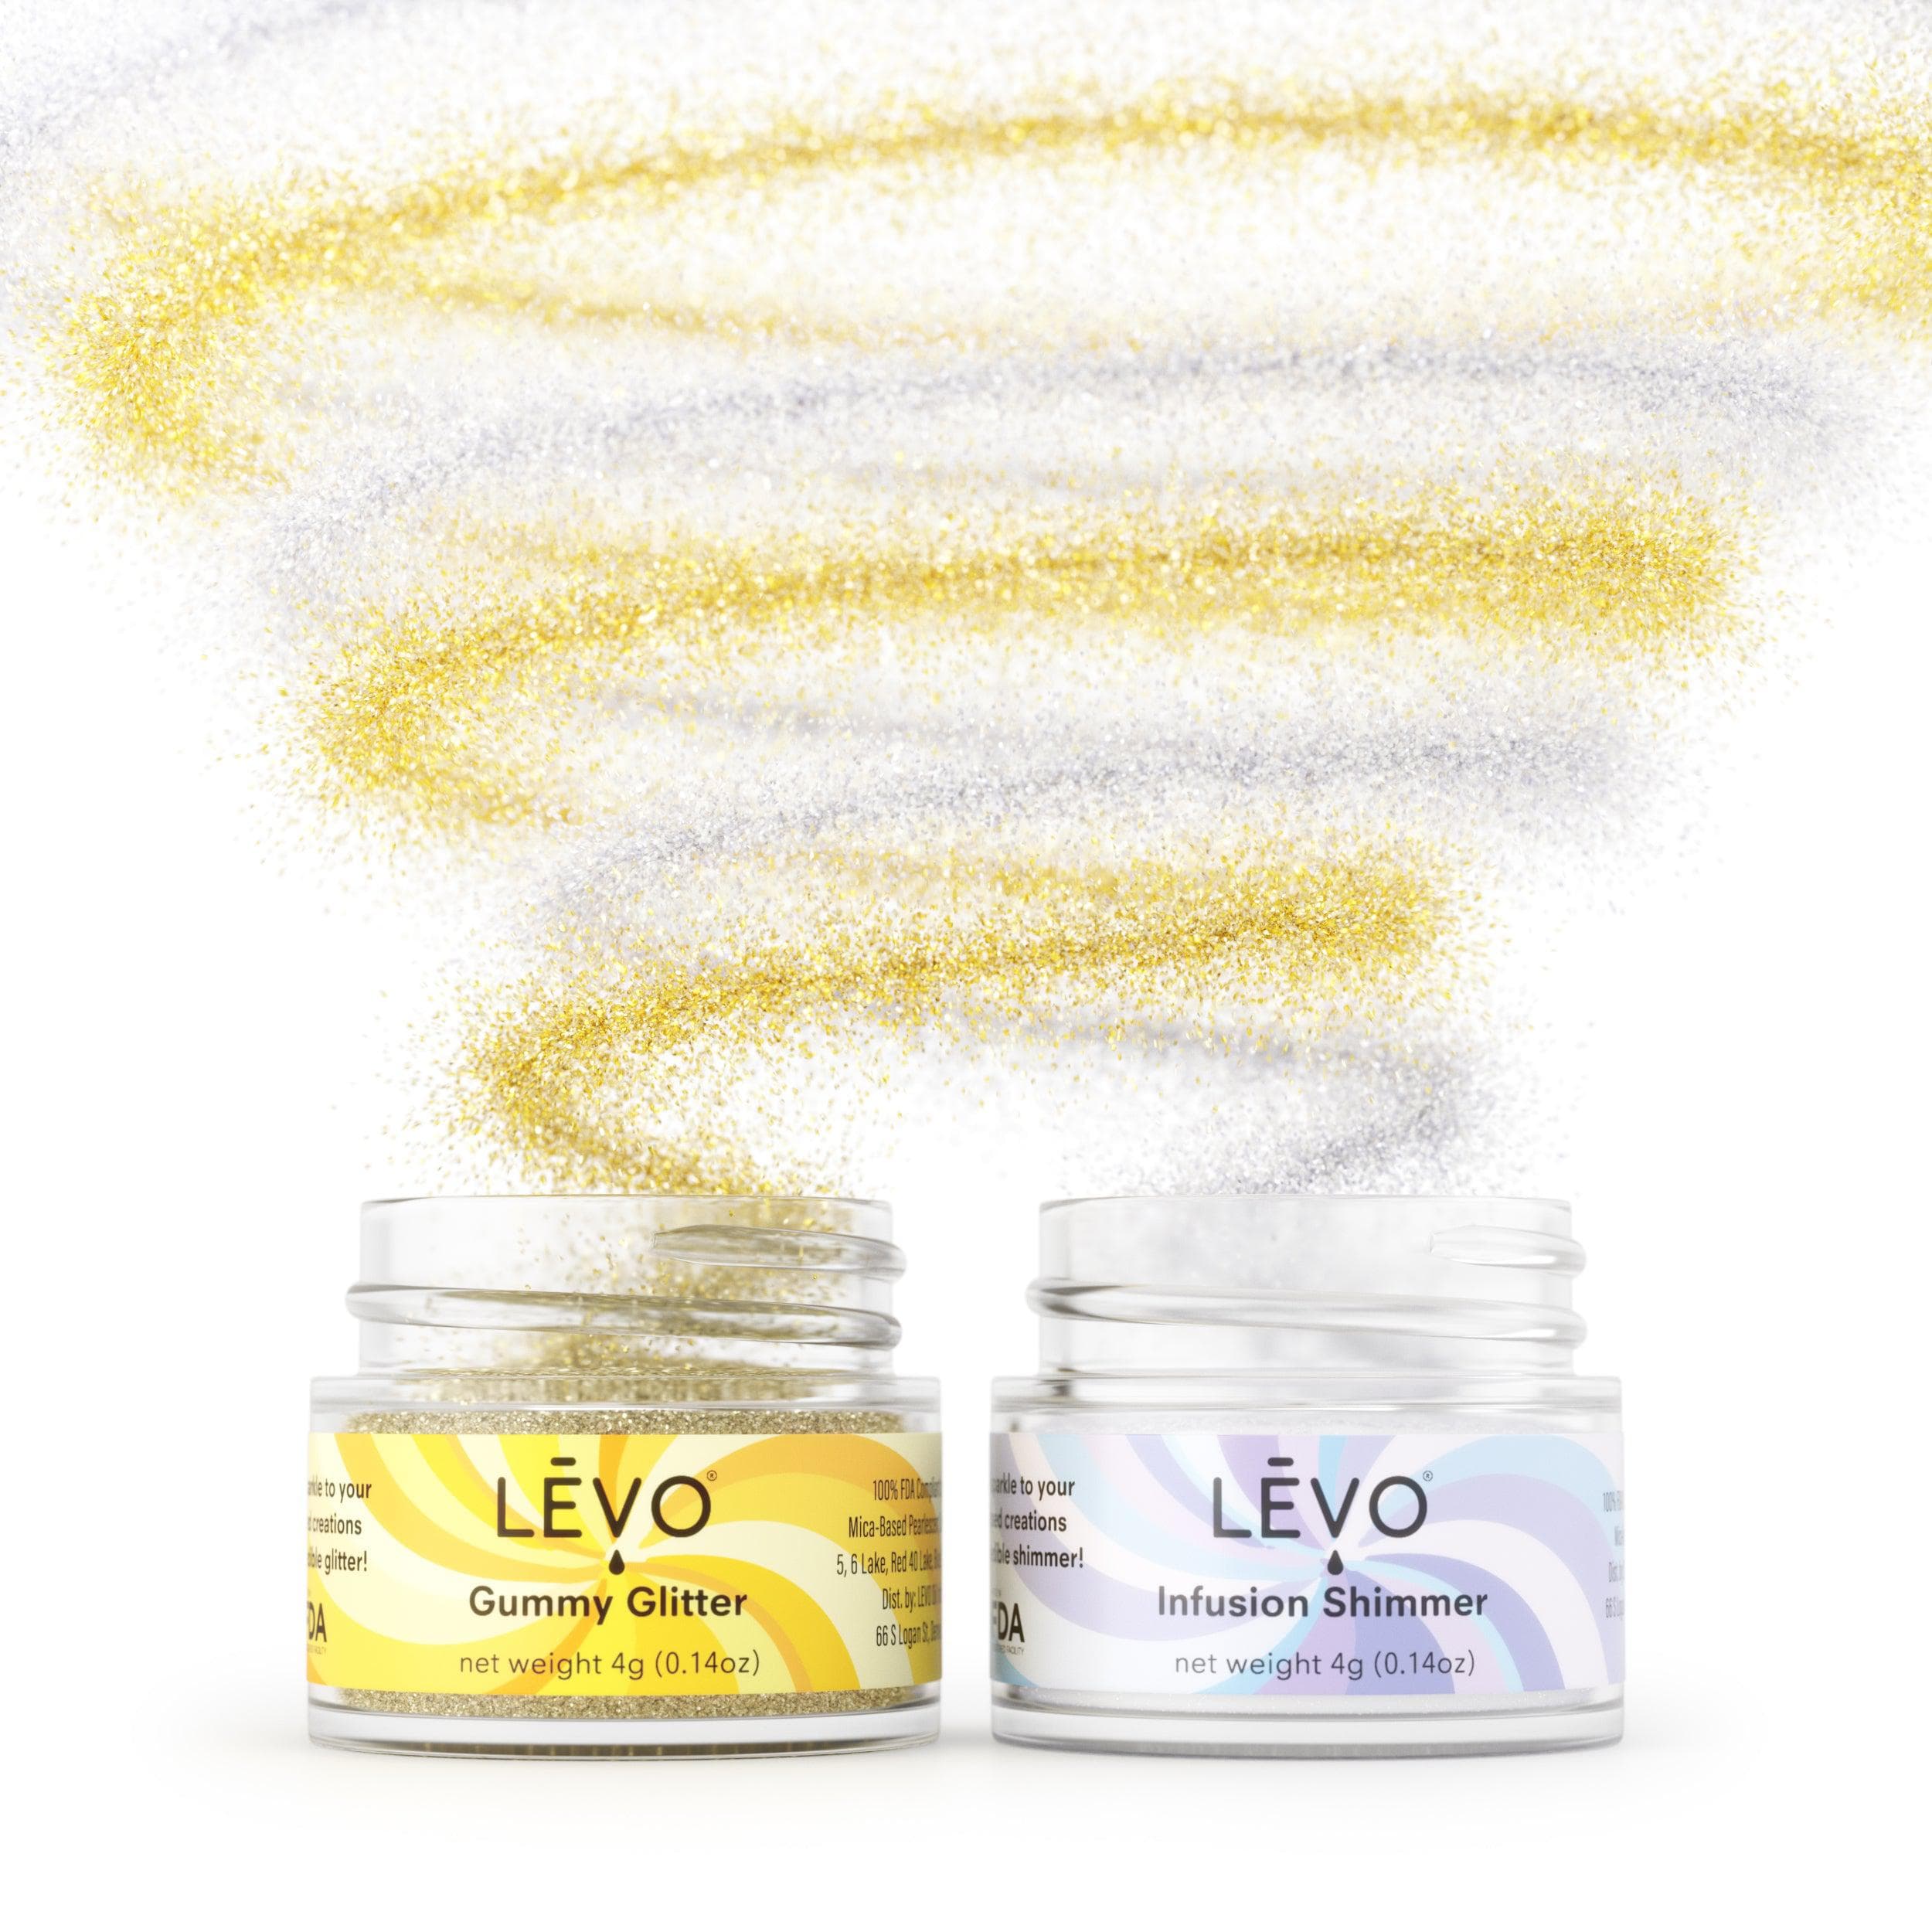 LEVO gummy glitter and LEVO infusion shimmer edible glitter to decorate gummy edibles. Add a touch of magic with the Edible Glitter and Shimmer in the Gummy Decorating Kit.